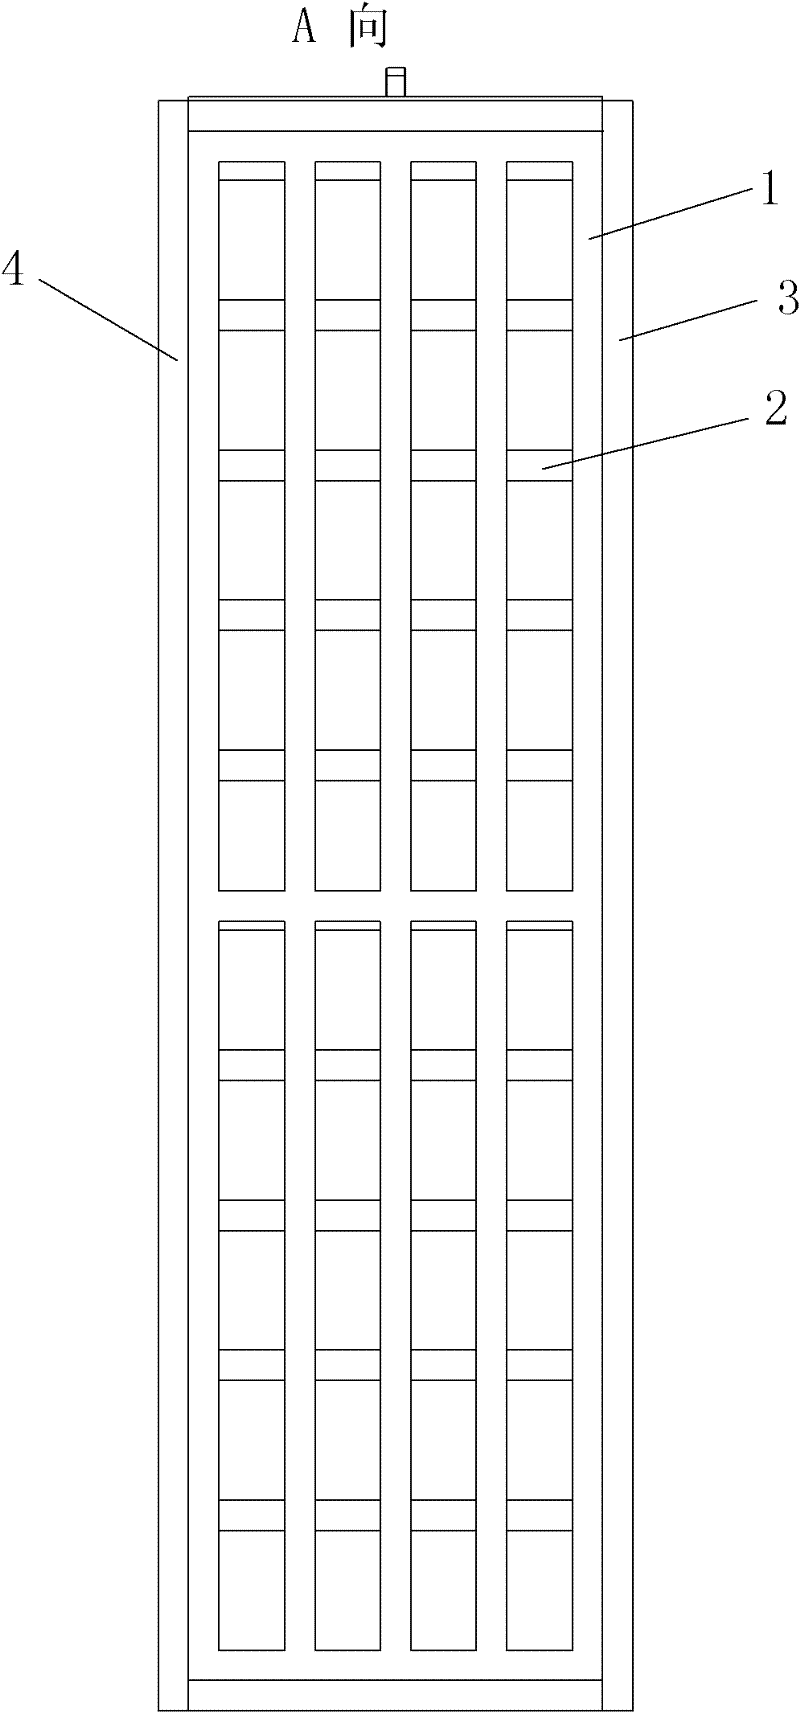 Double-purpose window with functions of theft resistance and escape